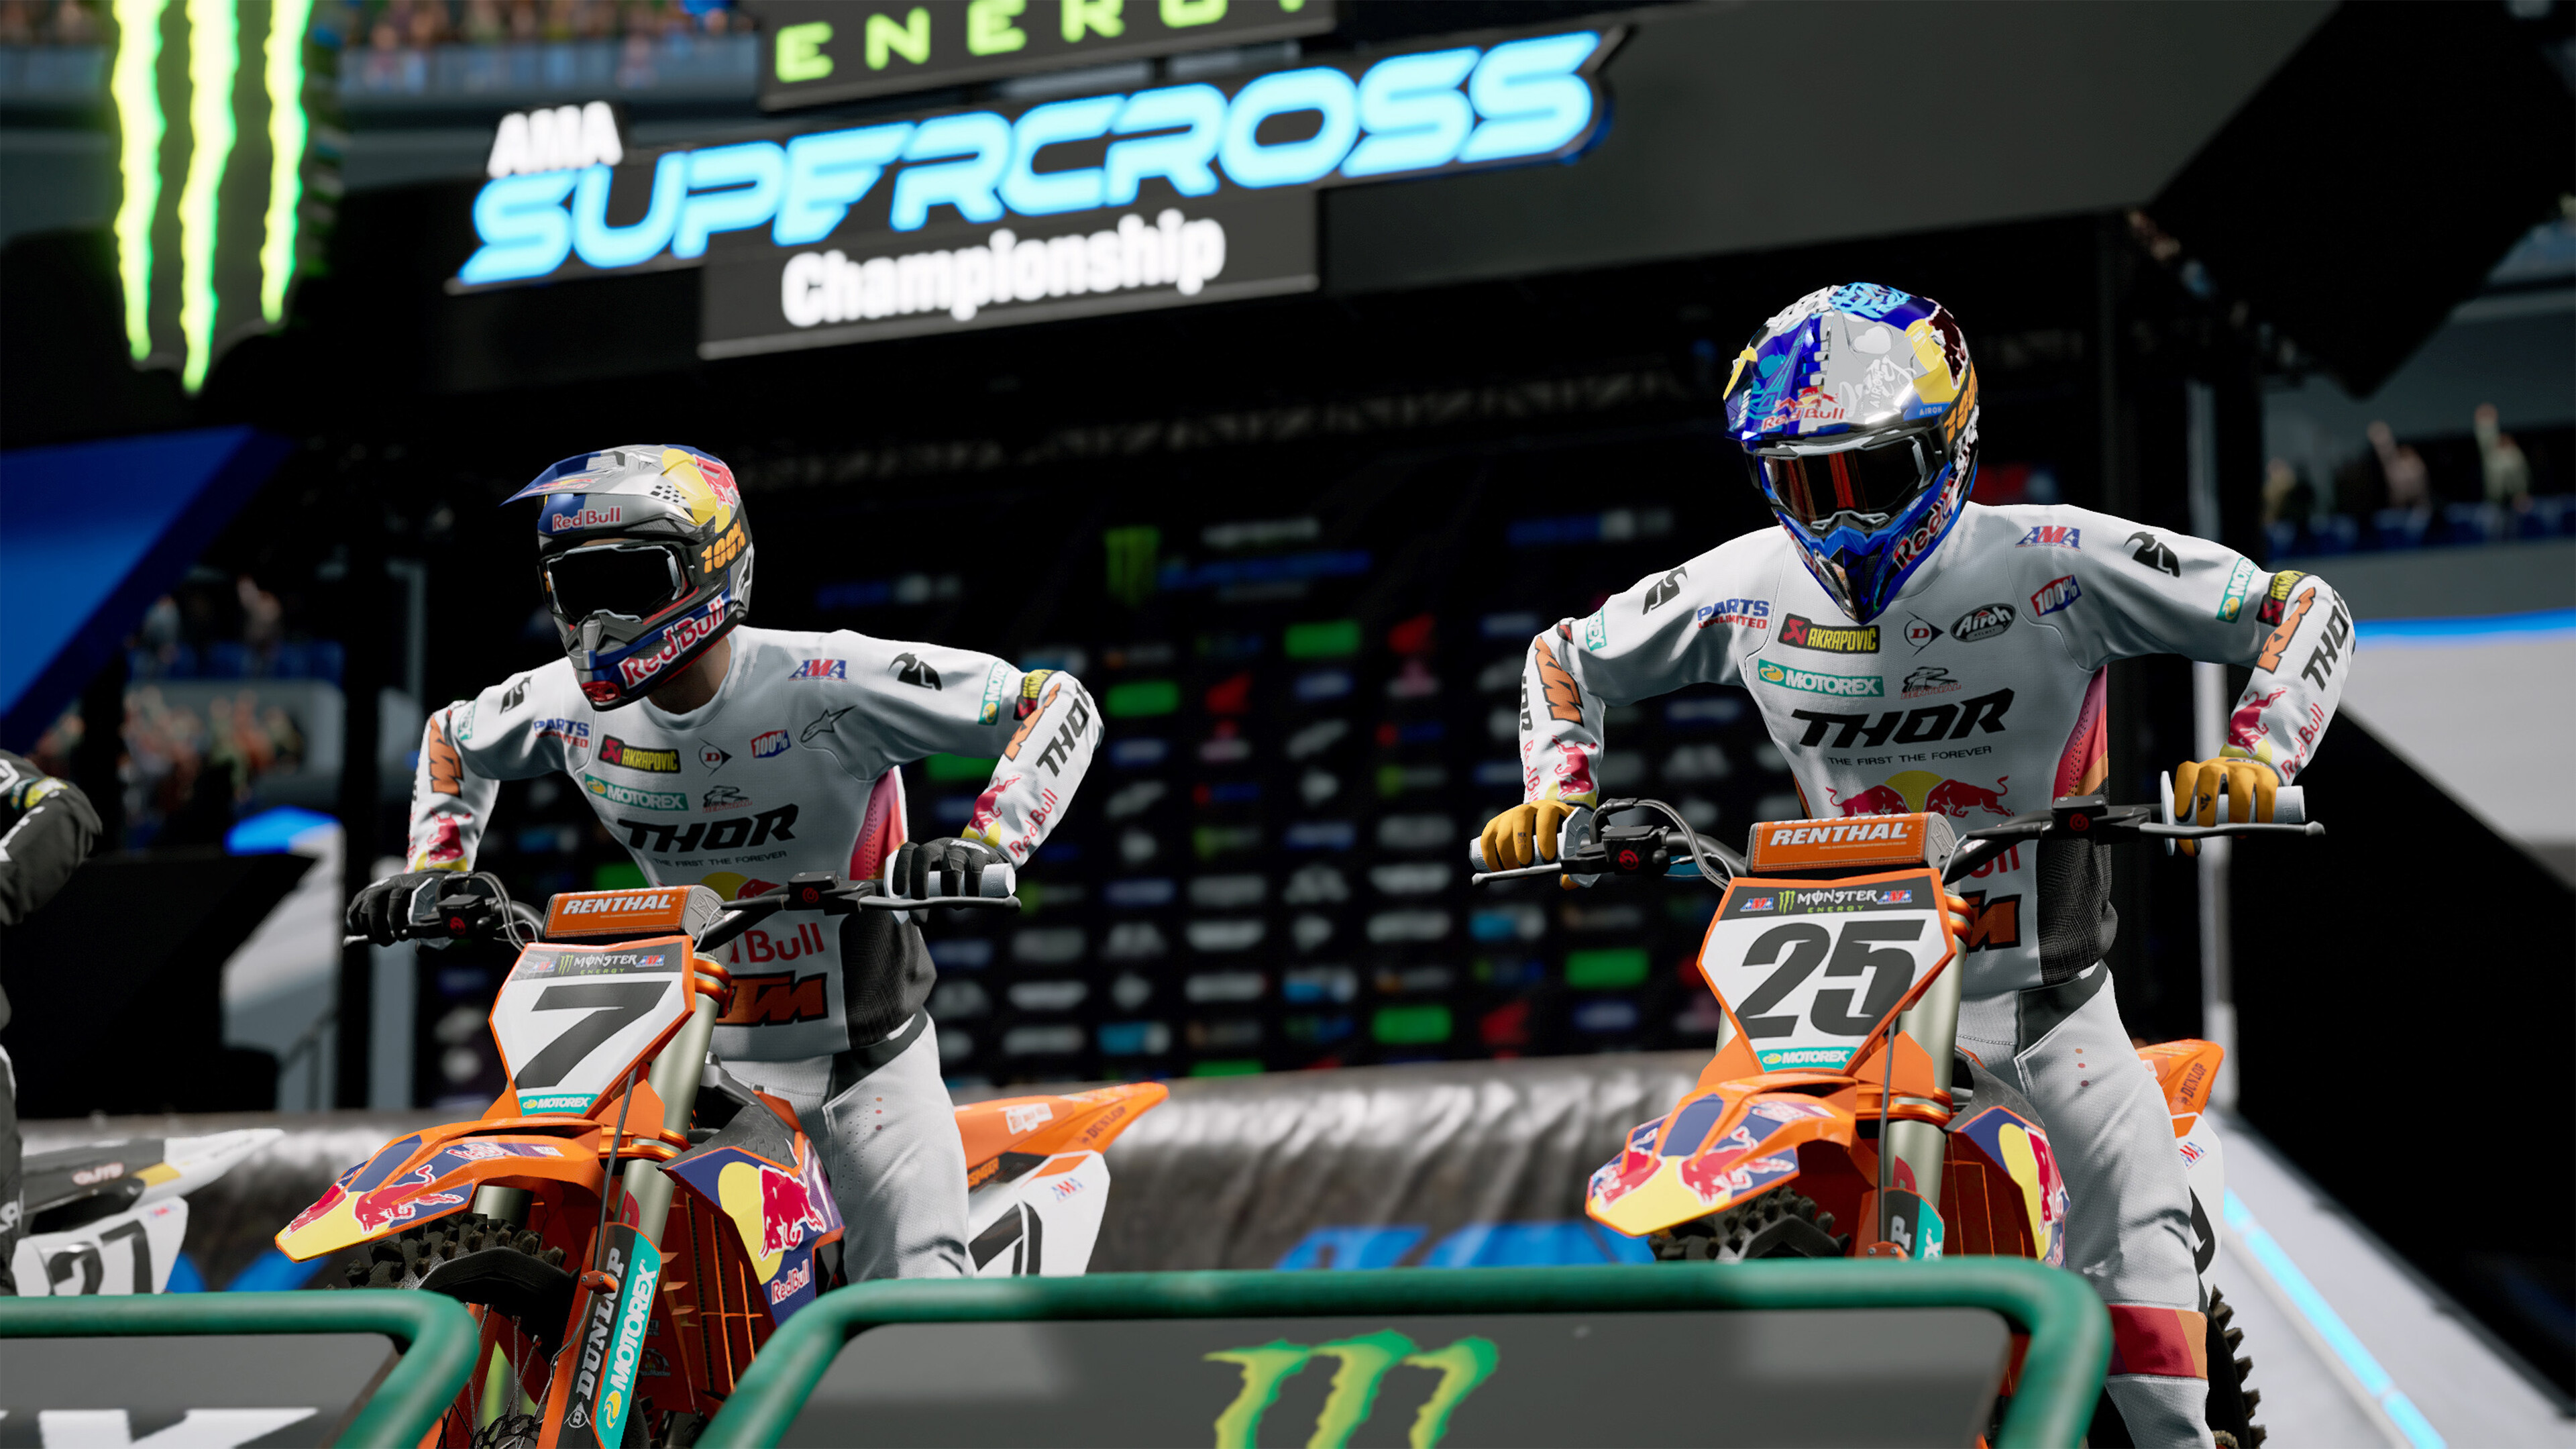 Monster Energy Supercross - The Official Videogame 6 Free Download for PC